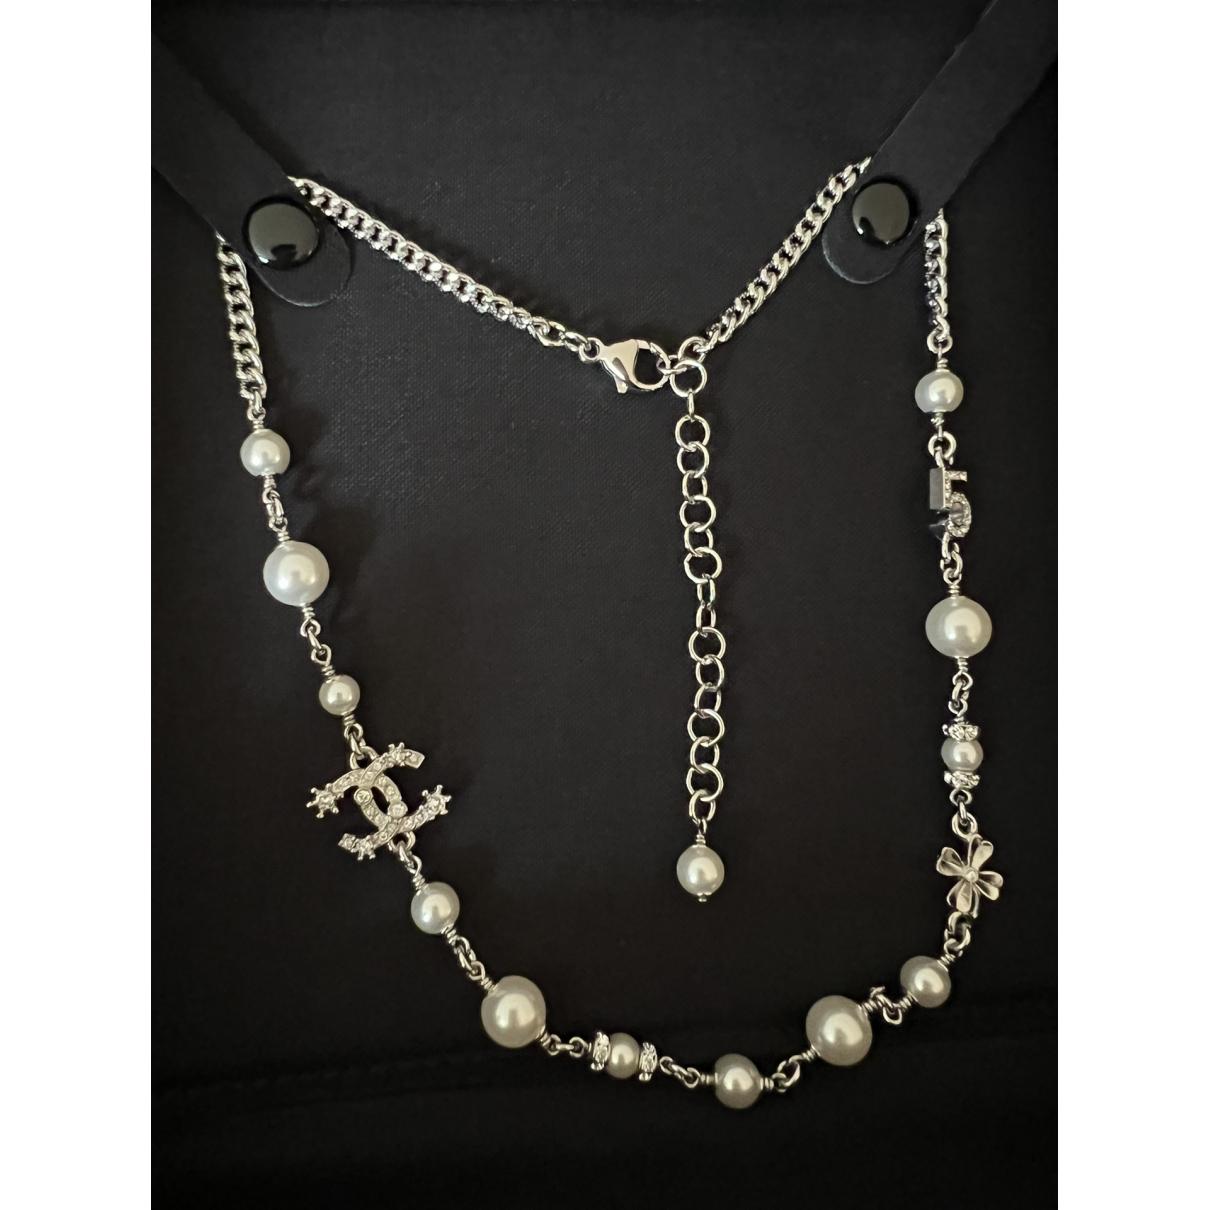 CC pearl necklace - 5